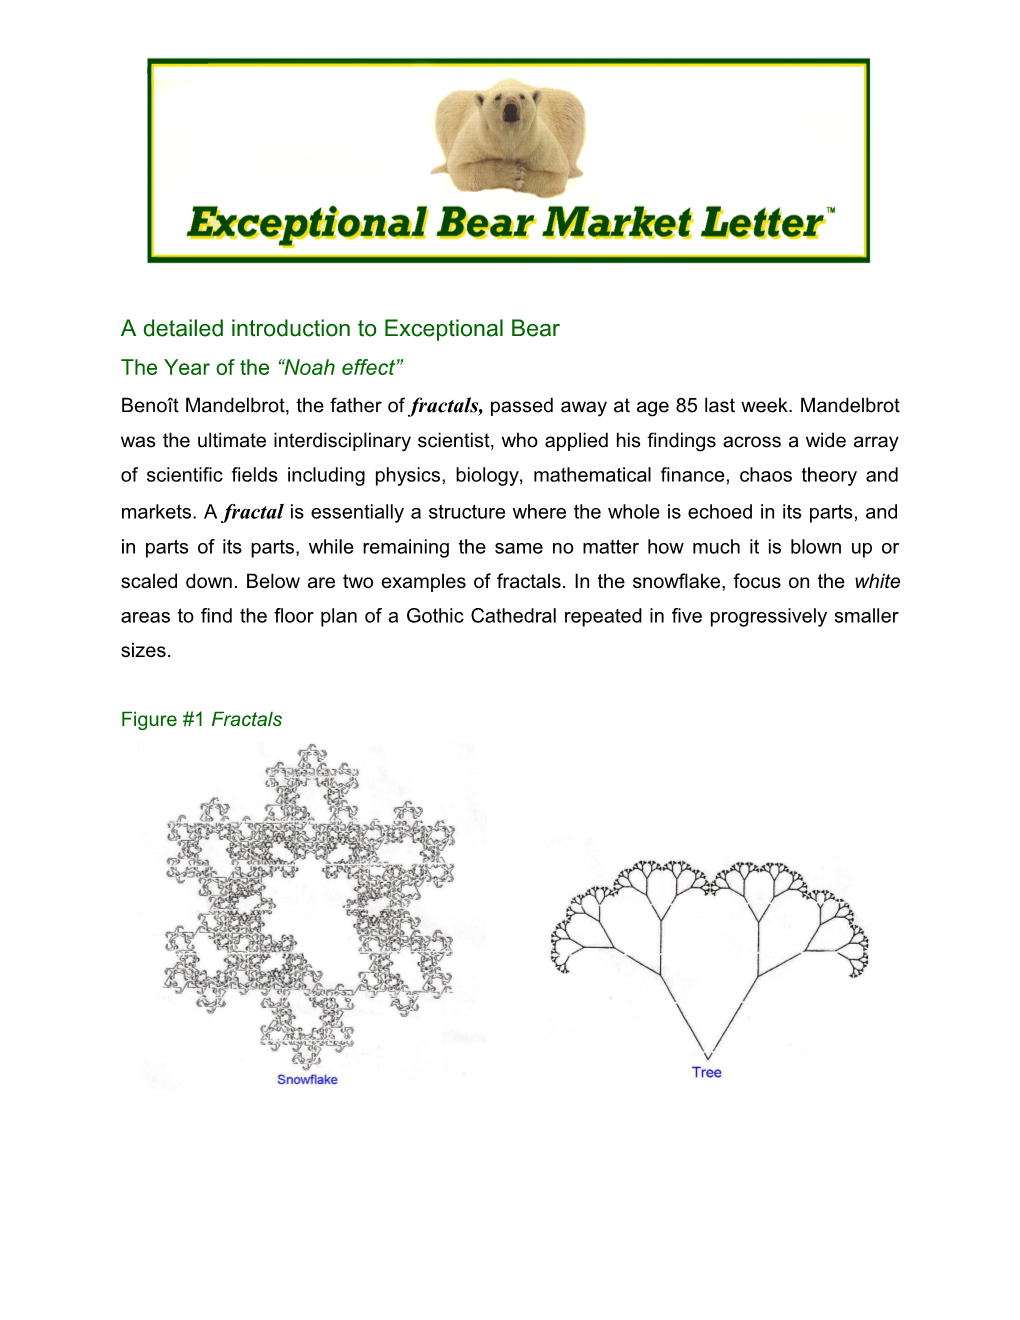 A Detailed Introduction to Exceptional Bear